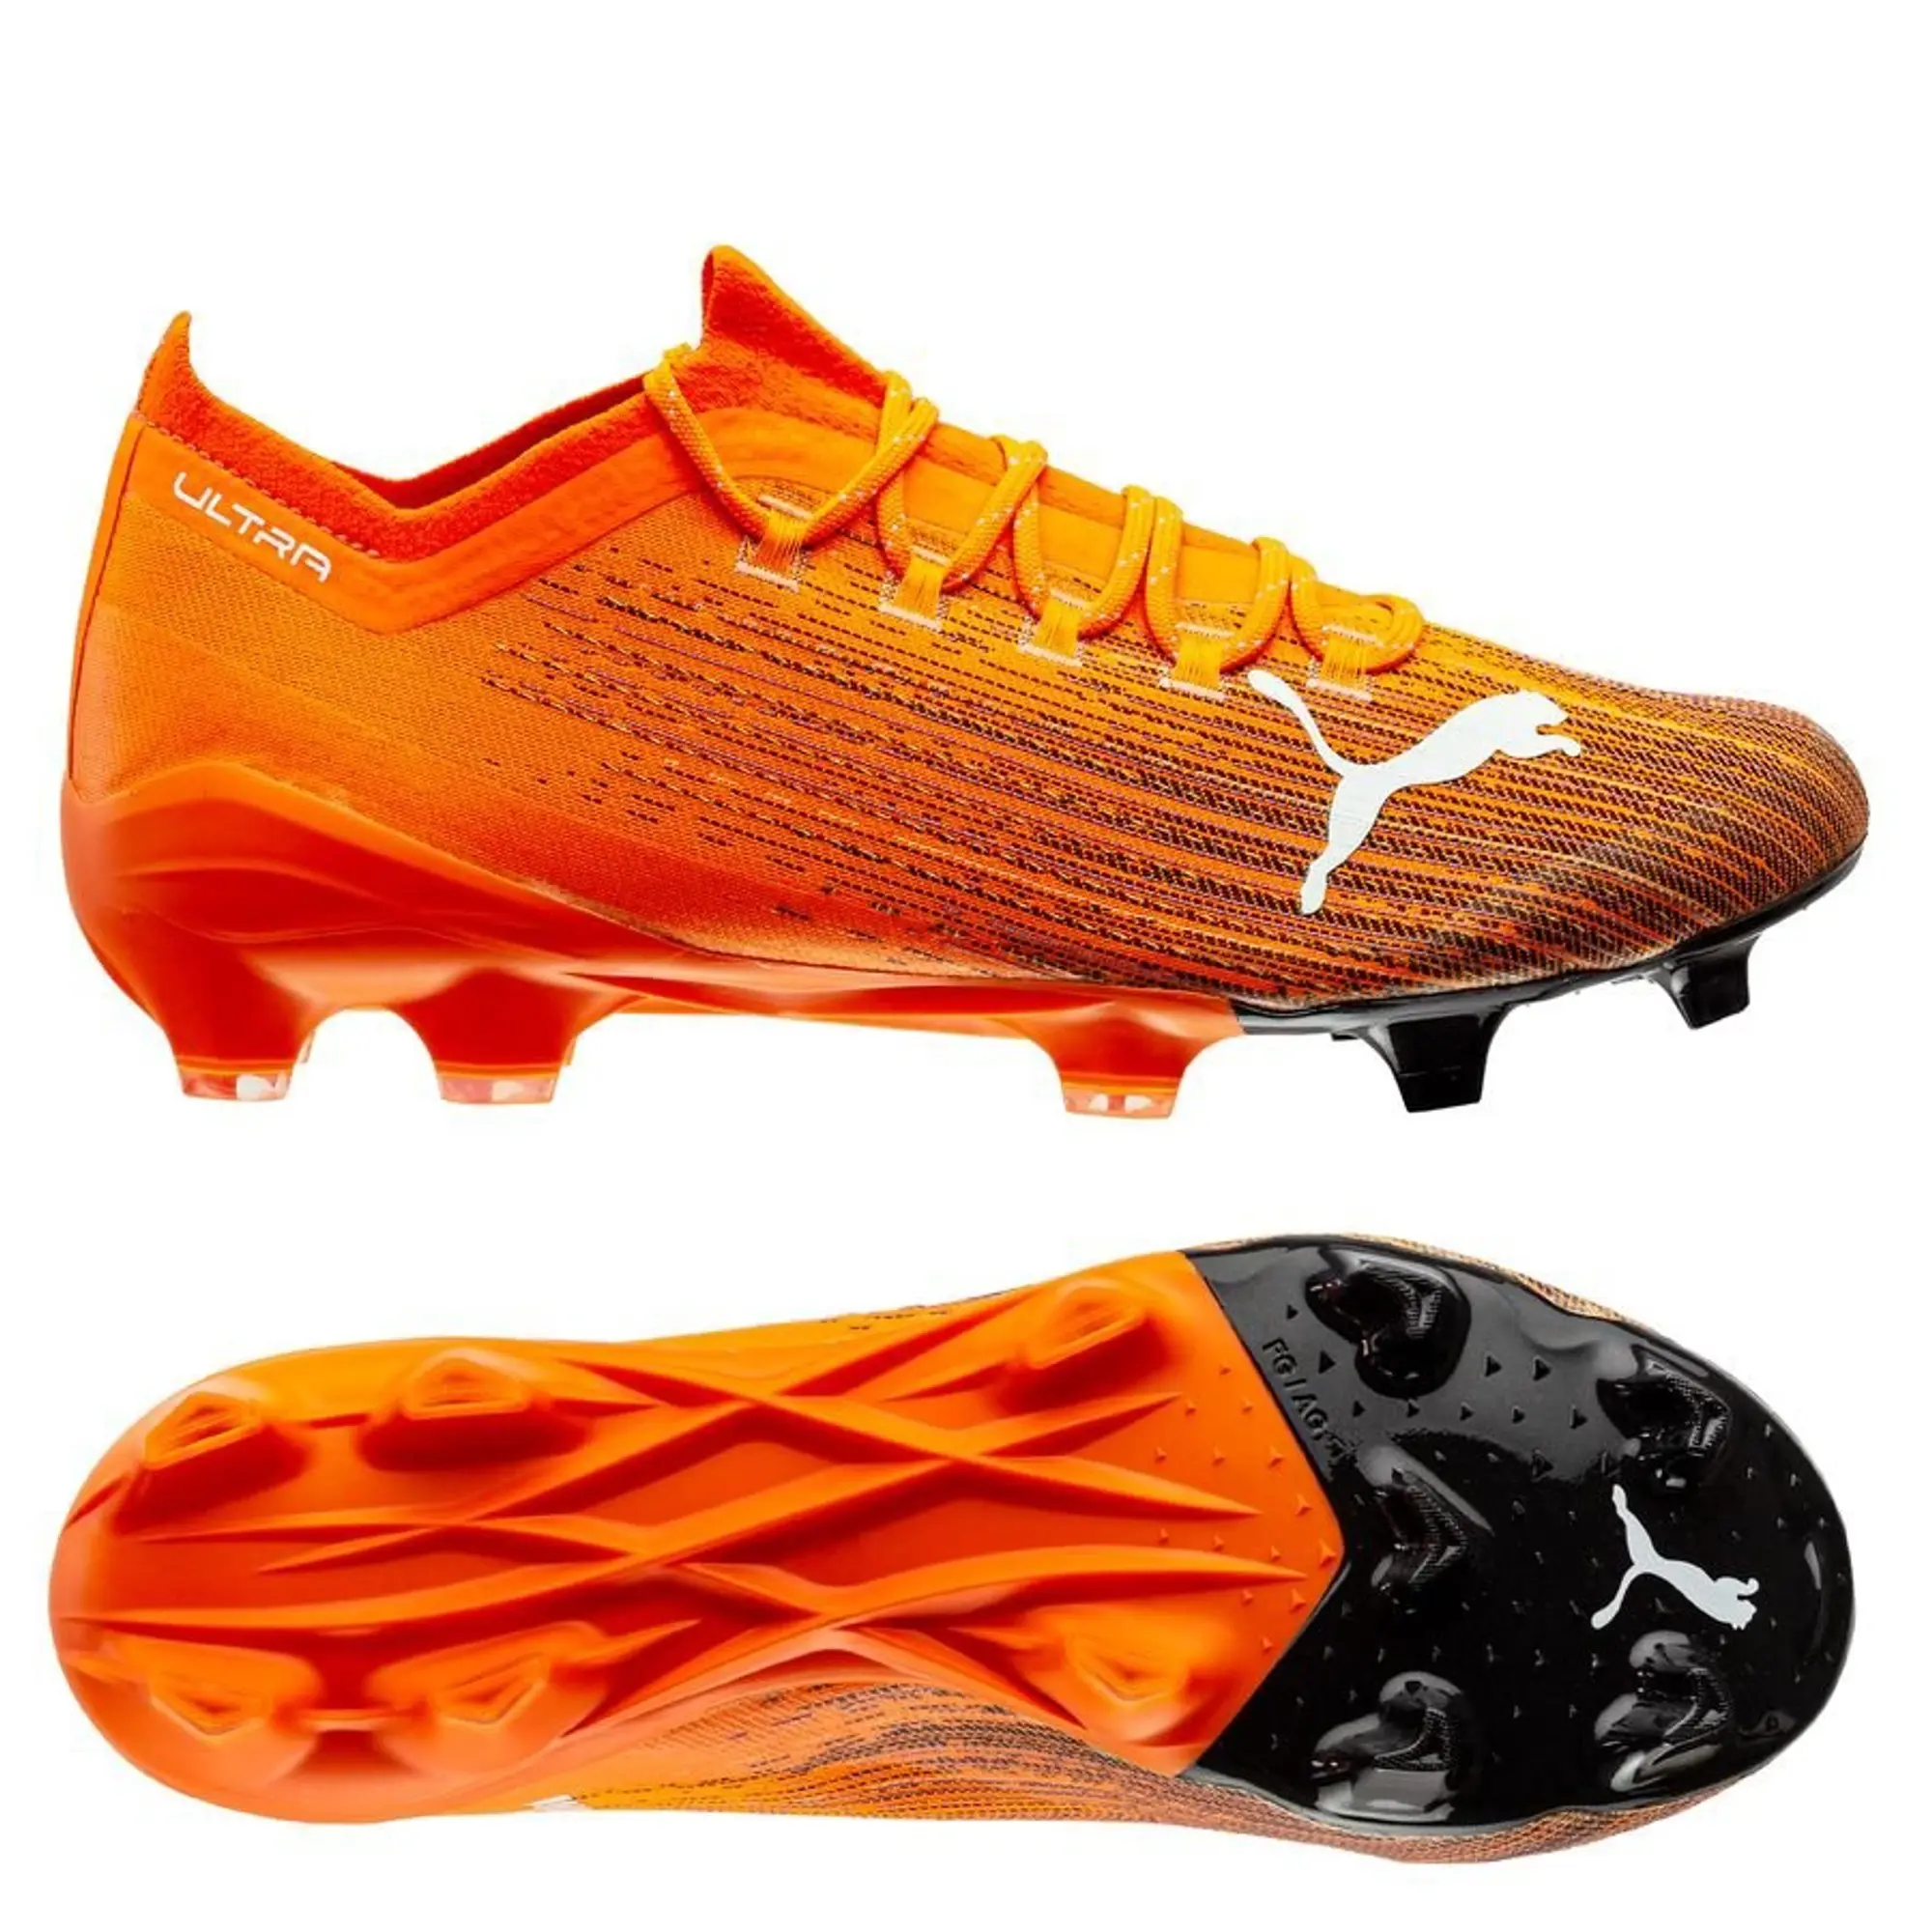 Puma Ultra 1.1 FG/AG Lace-Up Orange Synthetic Mens Football Boots 106044 01